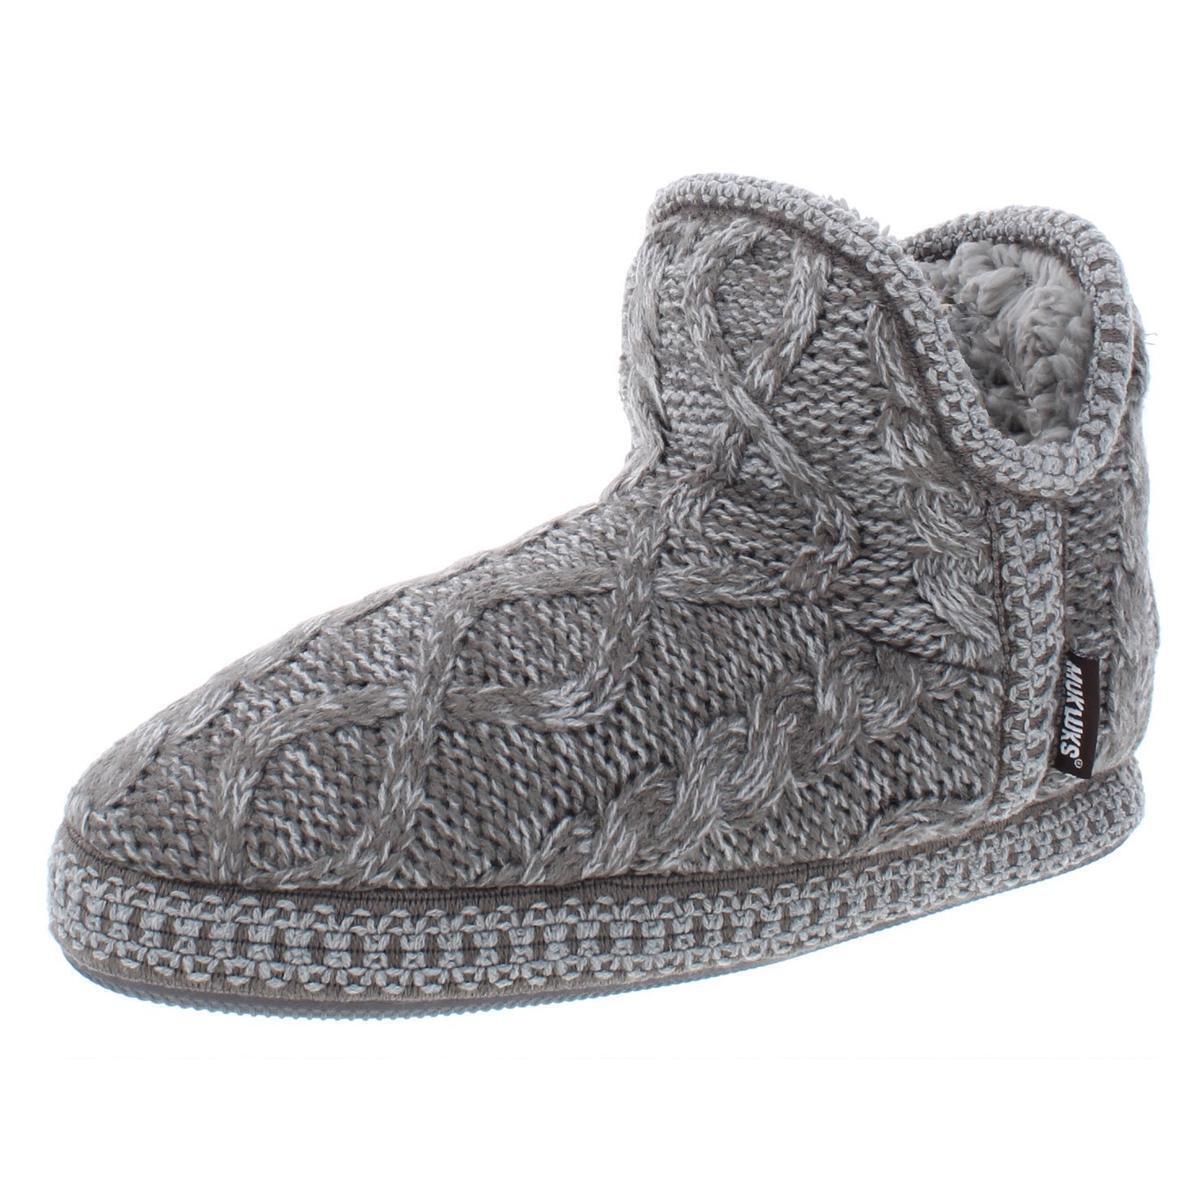 Muk Luks Womens Ankle Faux Fur Bootie Slippers alternate image